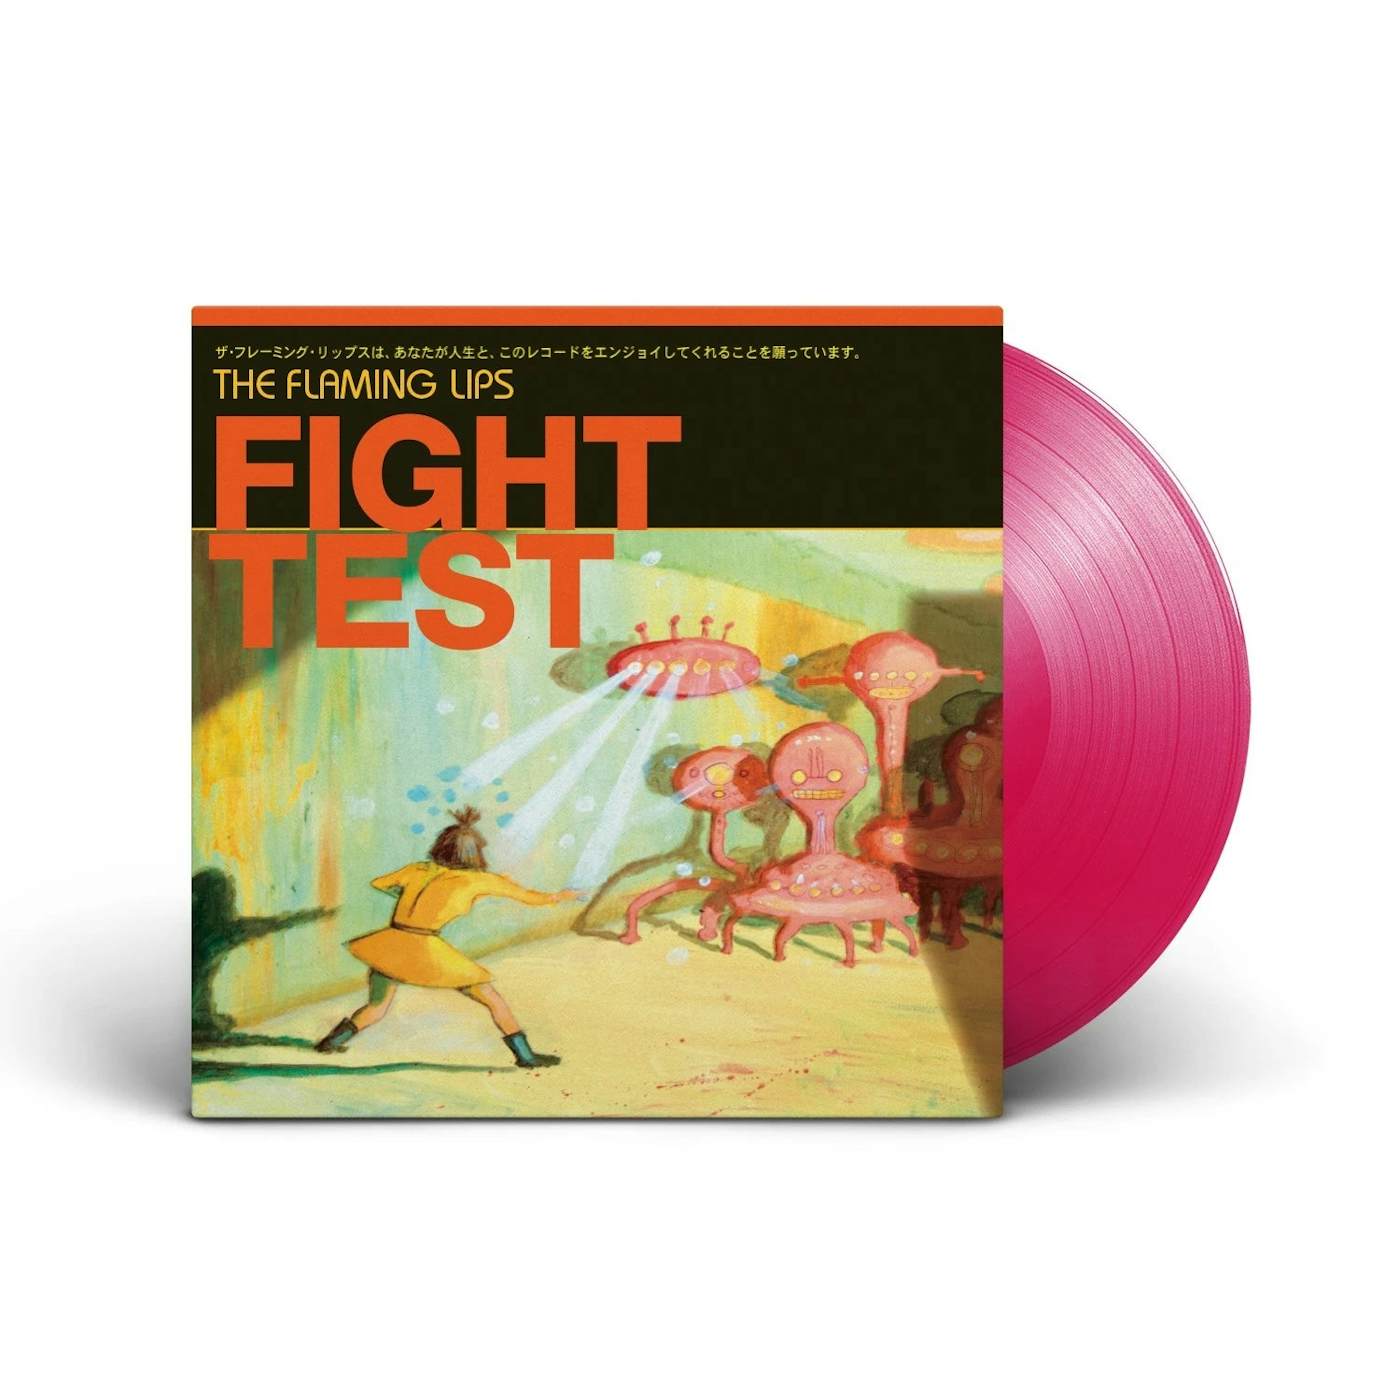 The Flaming Lips - Fight Test 12" purple